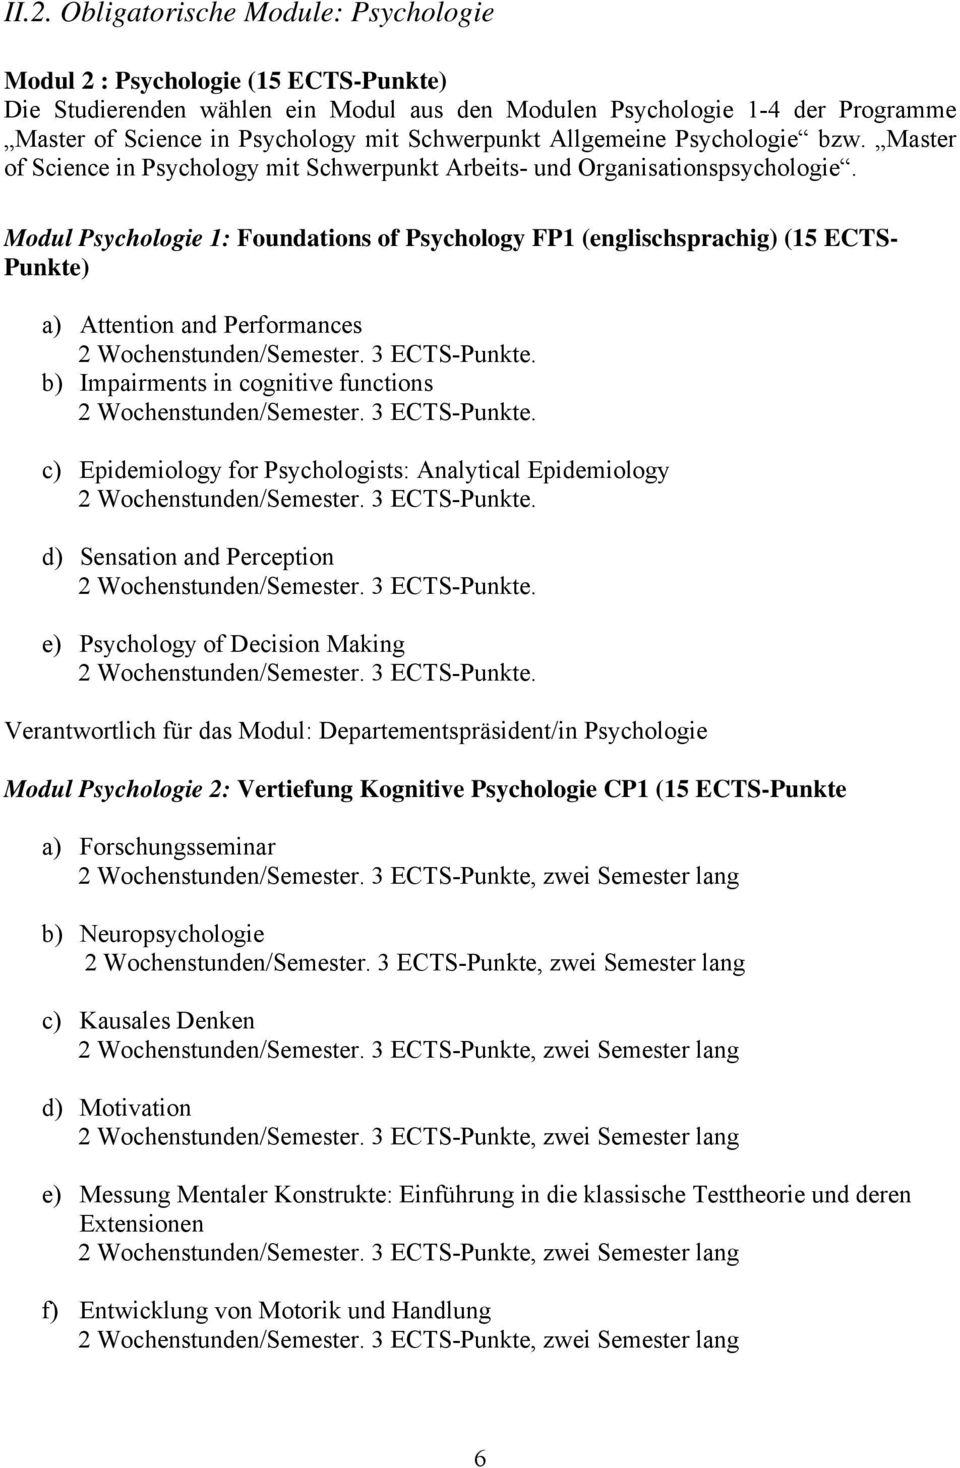 Modul Psychologie 1: Foundations of Psychology FP1 (englischsprachig) (15 ECTS- Punkte) a) Attention and Performances b) Impairments in cognitive functions c) Epidemiology for Psychologists: